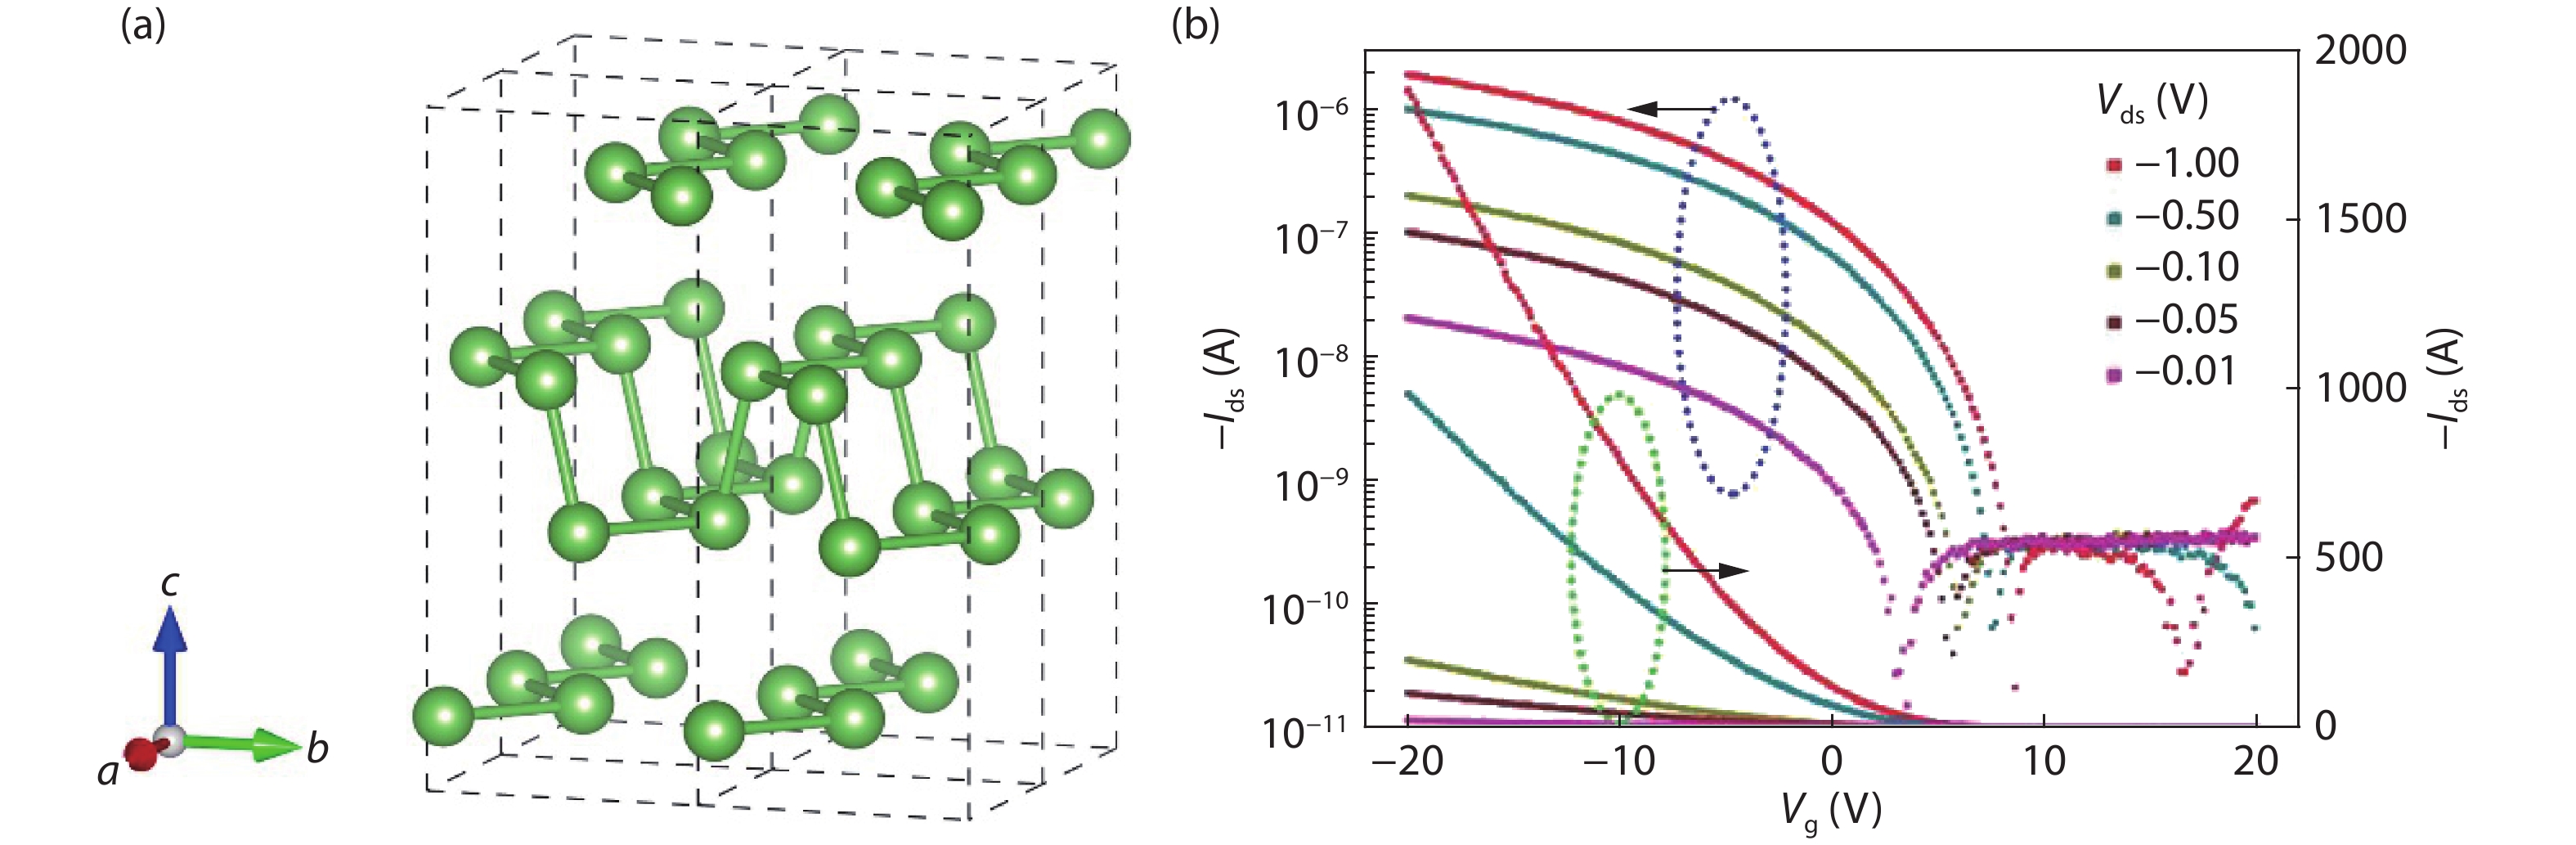 (Color online) (a) 3D crystal structures of b-As. (b) Transfer characteristics (Ids–Vg) of the monolayer b-As FET[5]. Copyright 2018 John Wiley and Sons.